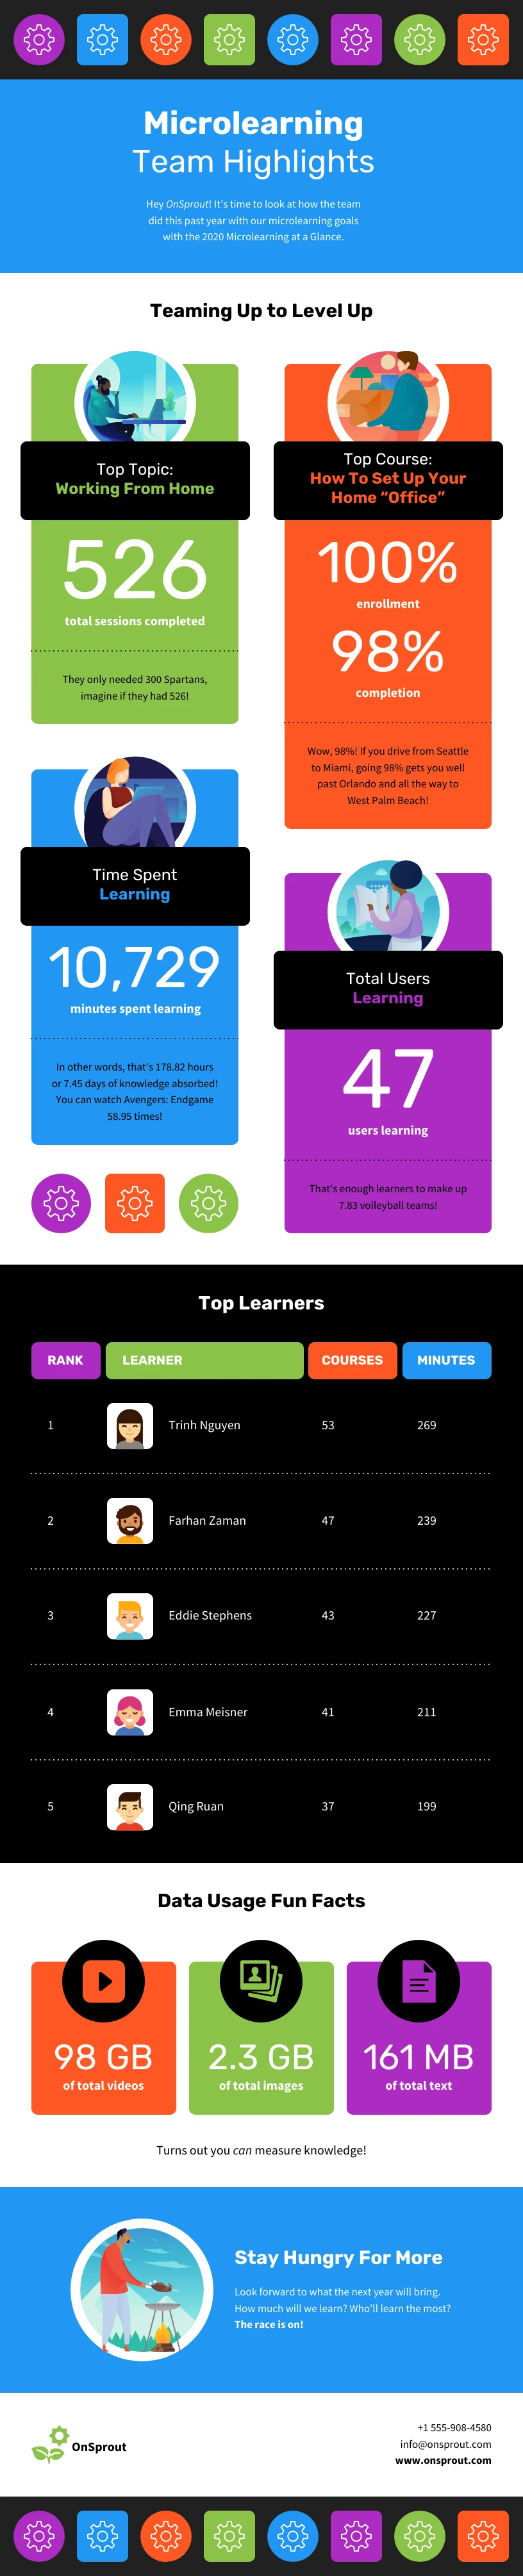 Top Learner Leaderboard Microlearning Infographic - Venngage